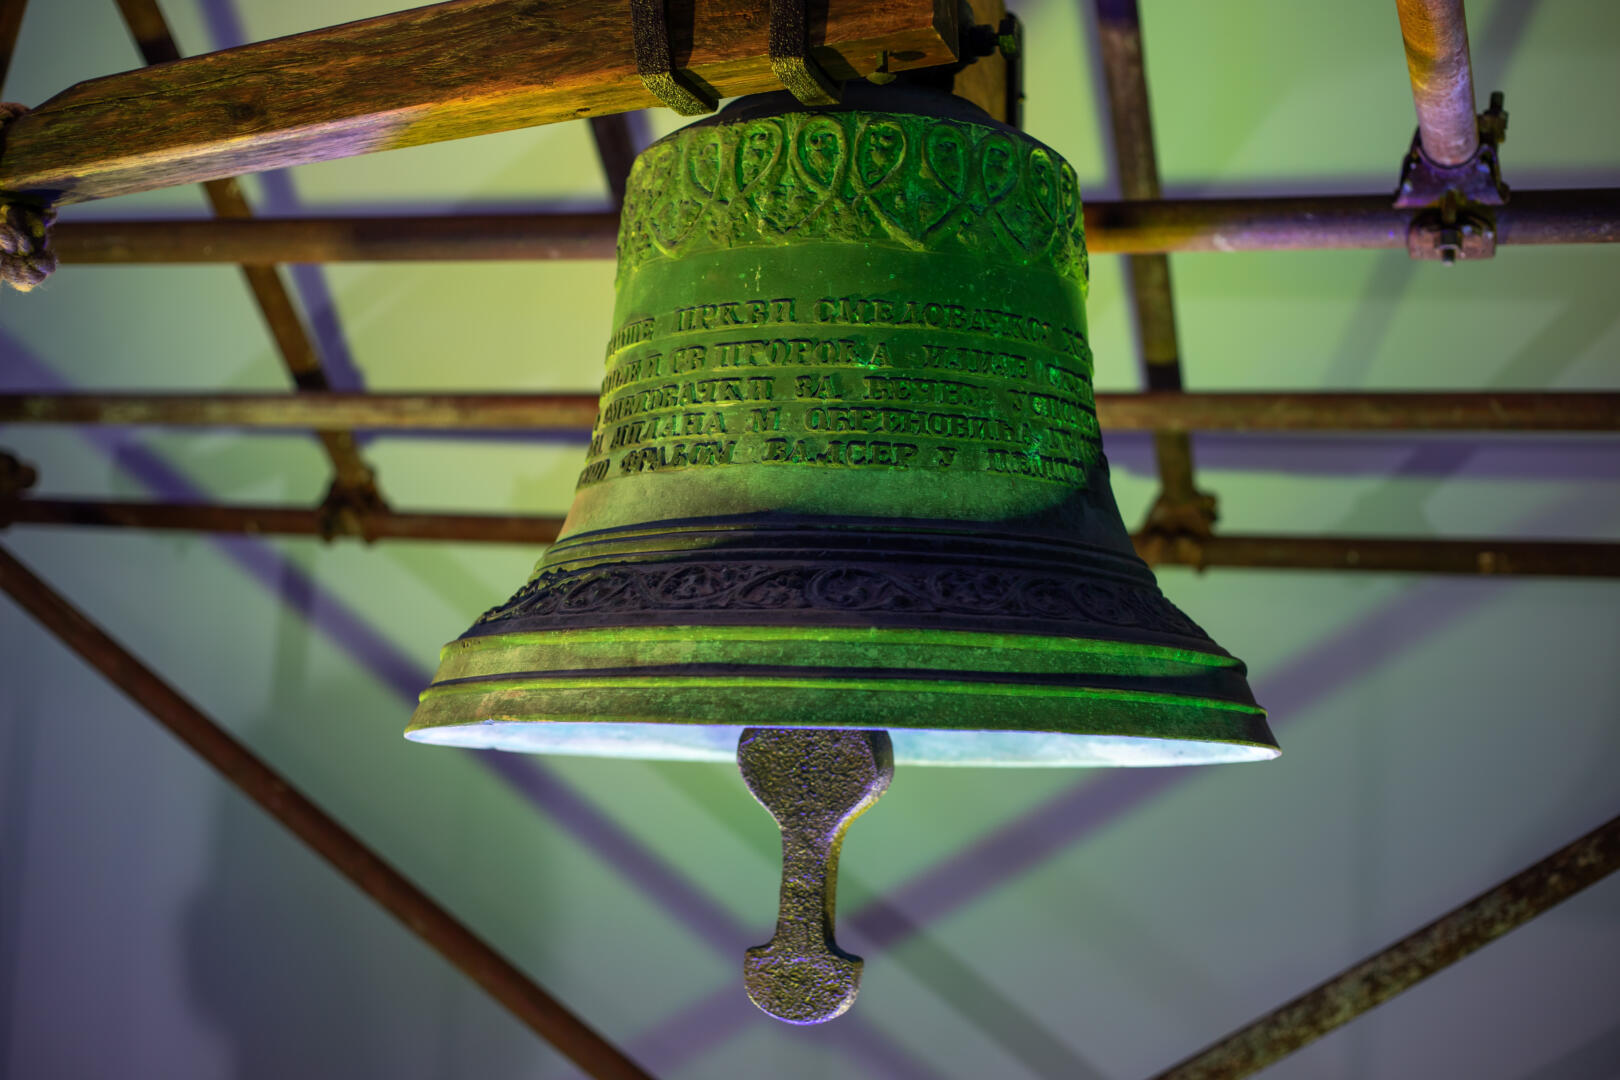 The old bell, the symbol of Smedovac village, restored and exhibited in the National Museum in Belgrade thanks to the EU